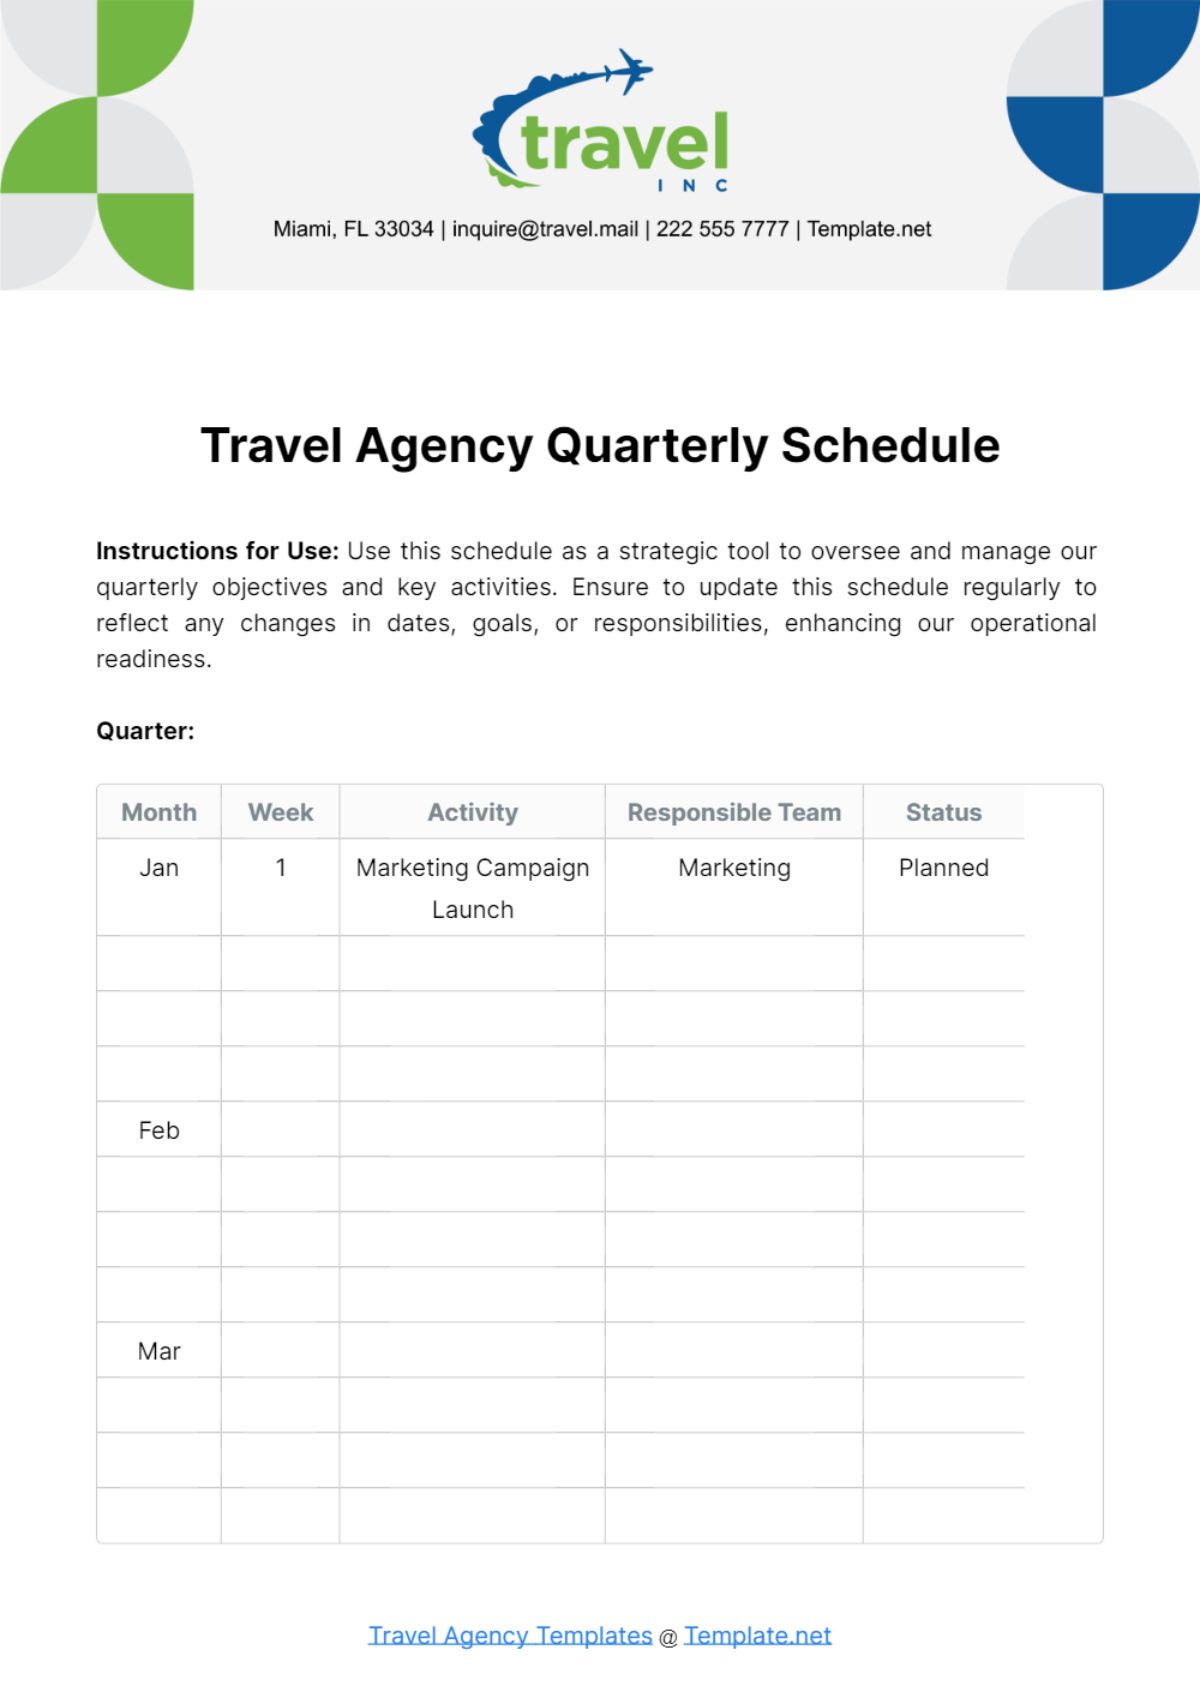 Travel Agency Quarterly Schedule Template